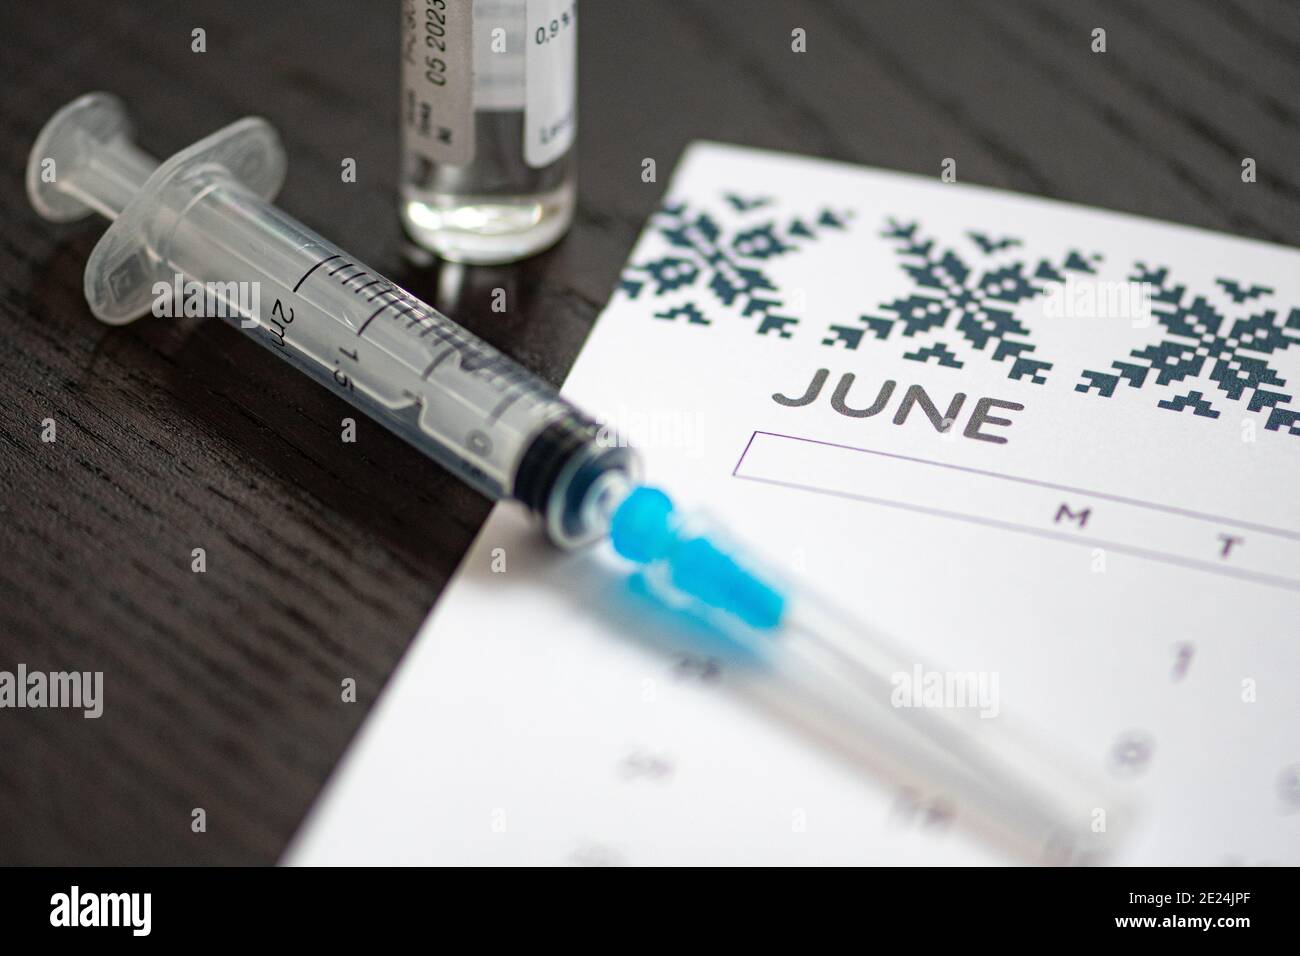 Syringe, vial and calendar with month of June on a black table ready to be used. Covid or Coronavirus vaccine background Stock Photo